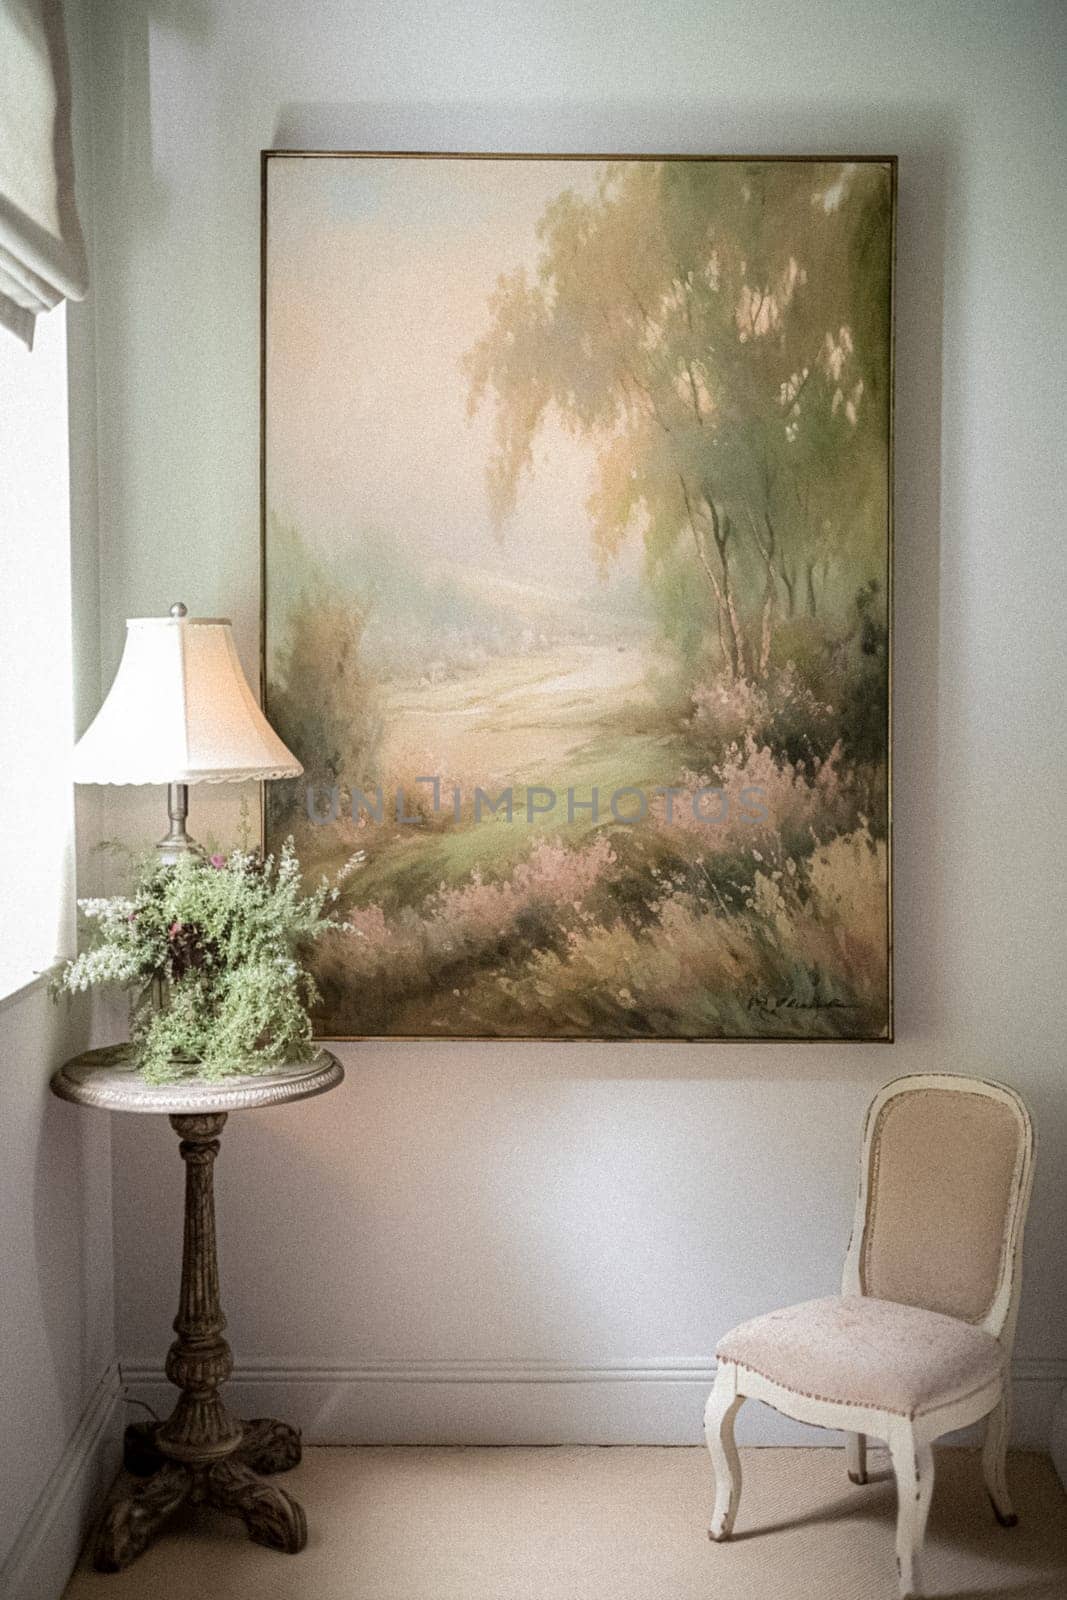 Artwork in a frame in the English countryside style, art and home decor by Anneleven